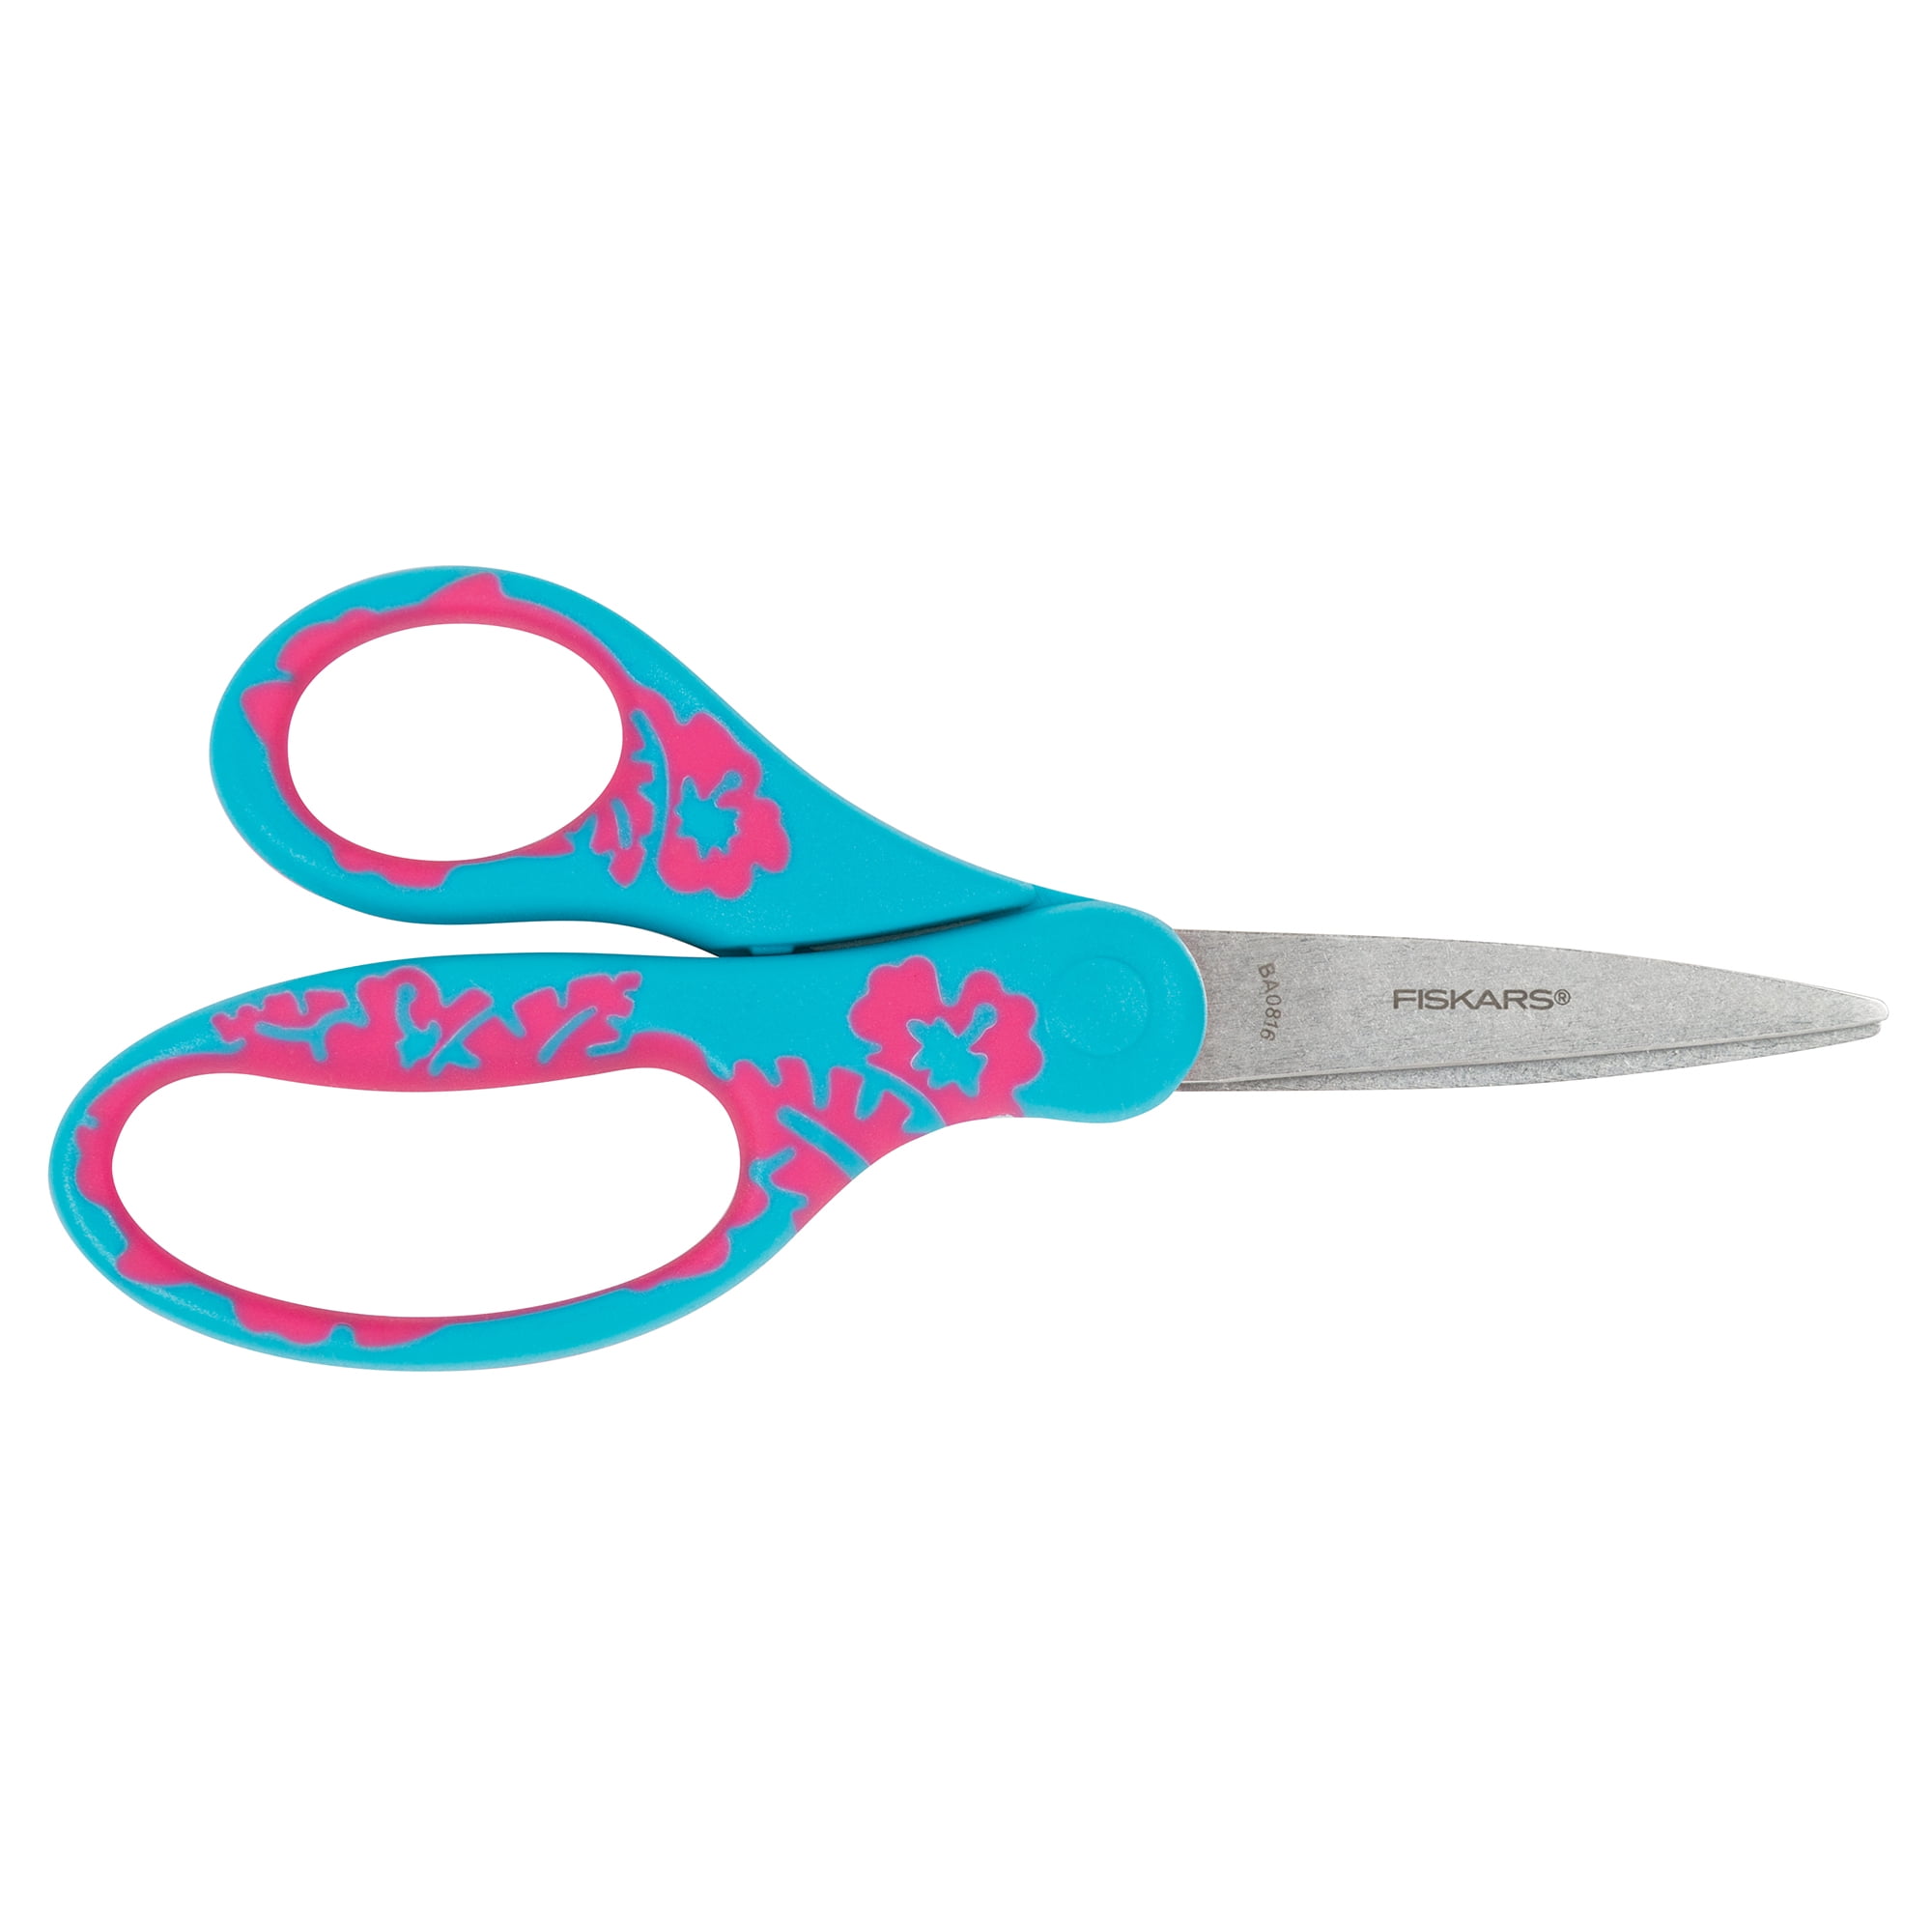 Curved Edges Safety Scissors Portable Hand Scissors Universal Household Childrens  Scissors Accessories Tools Plastic Binding